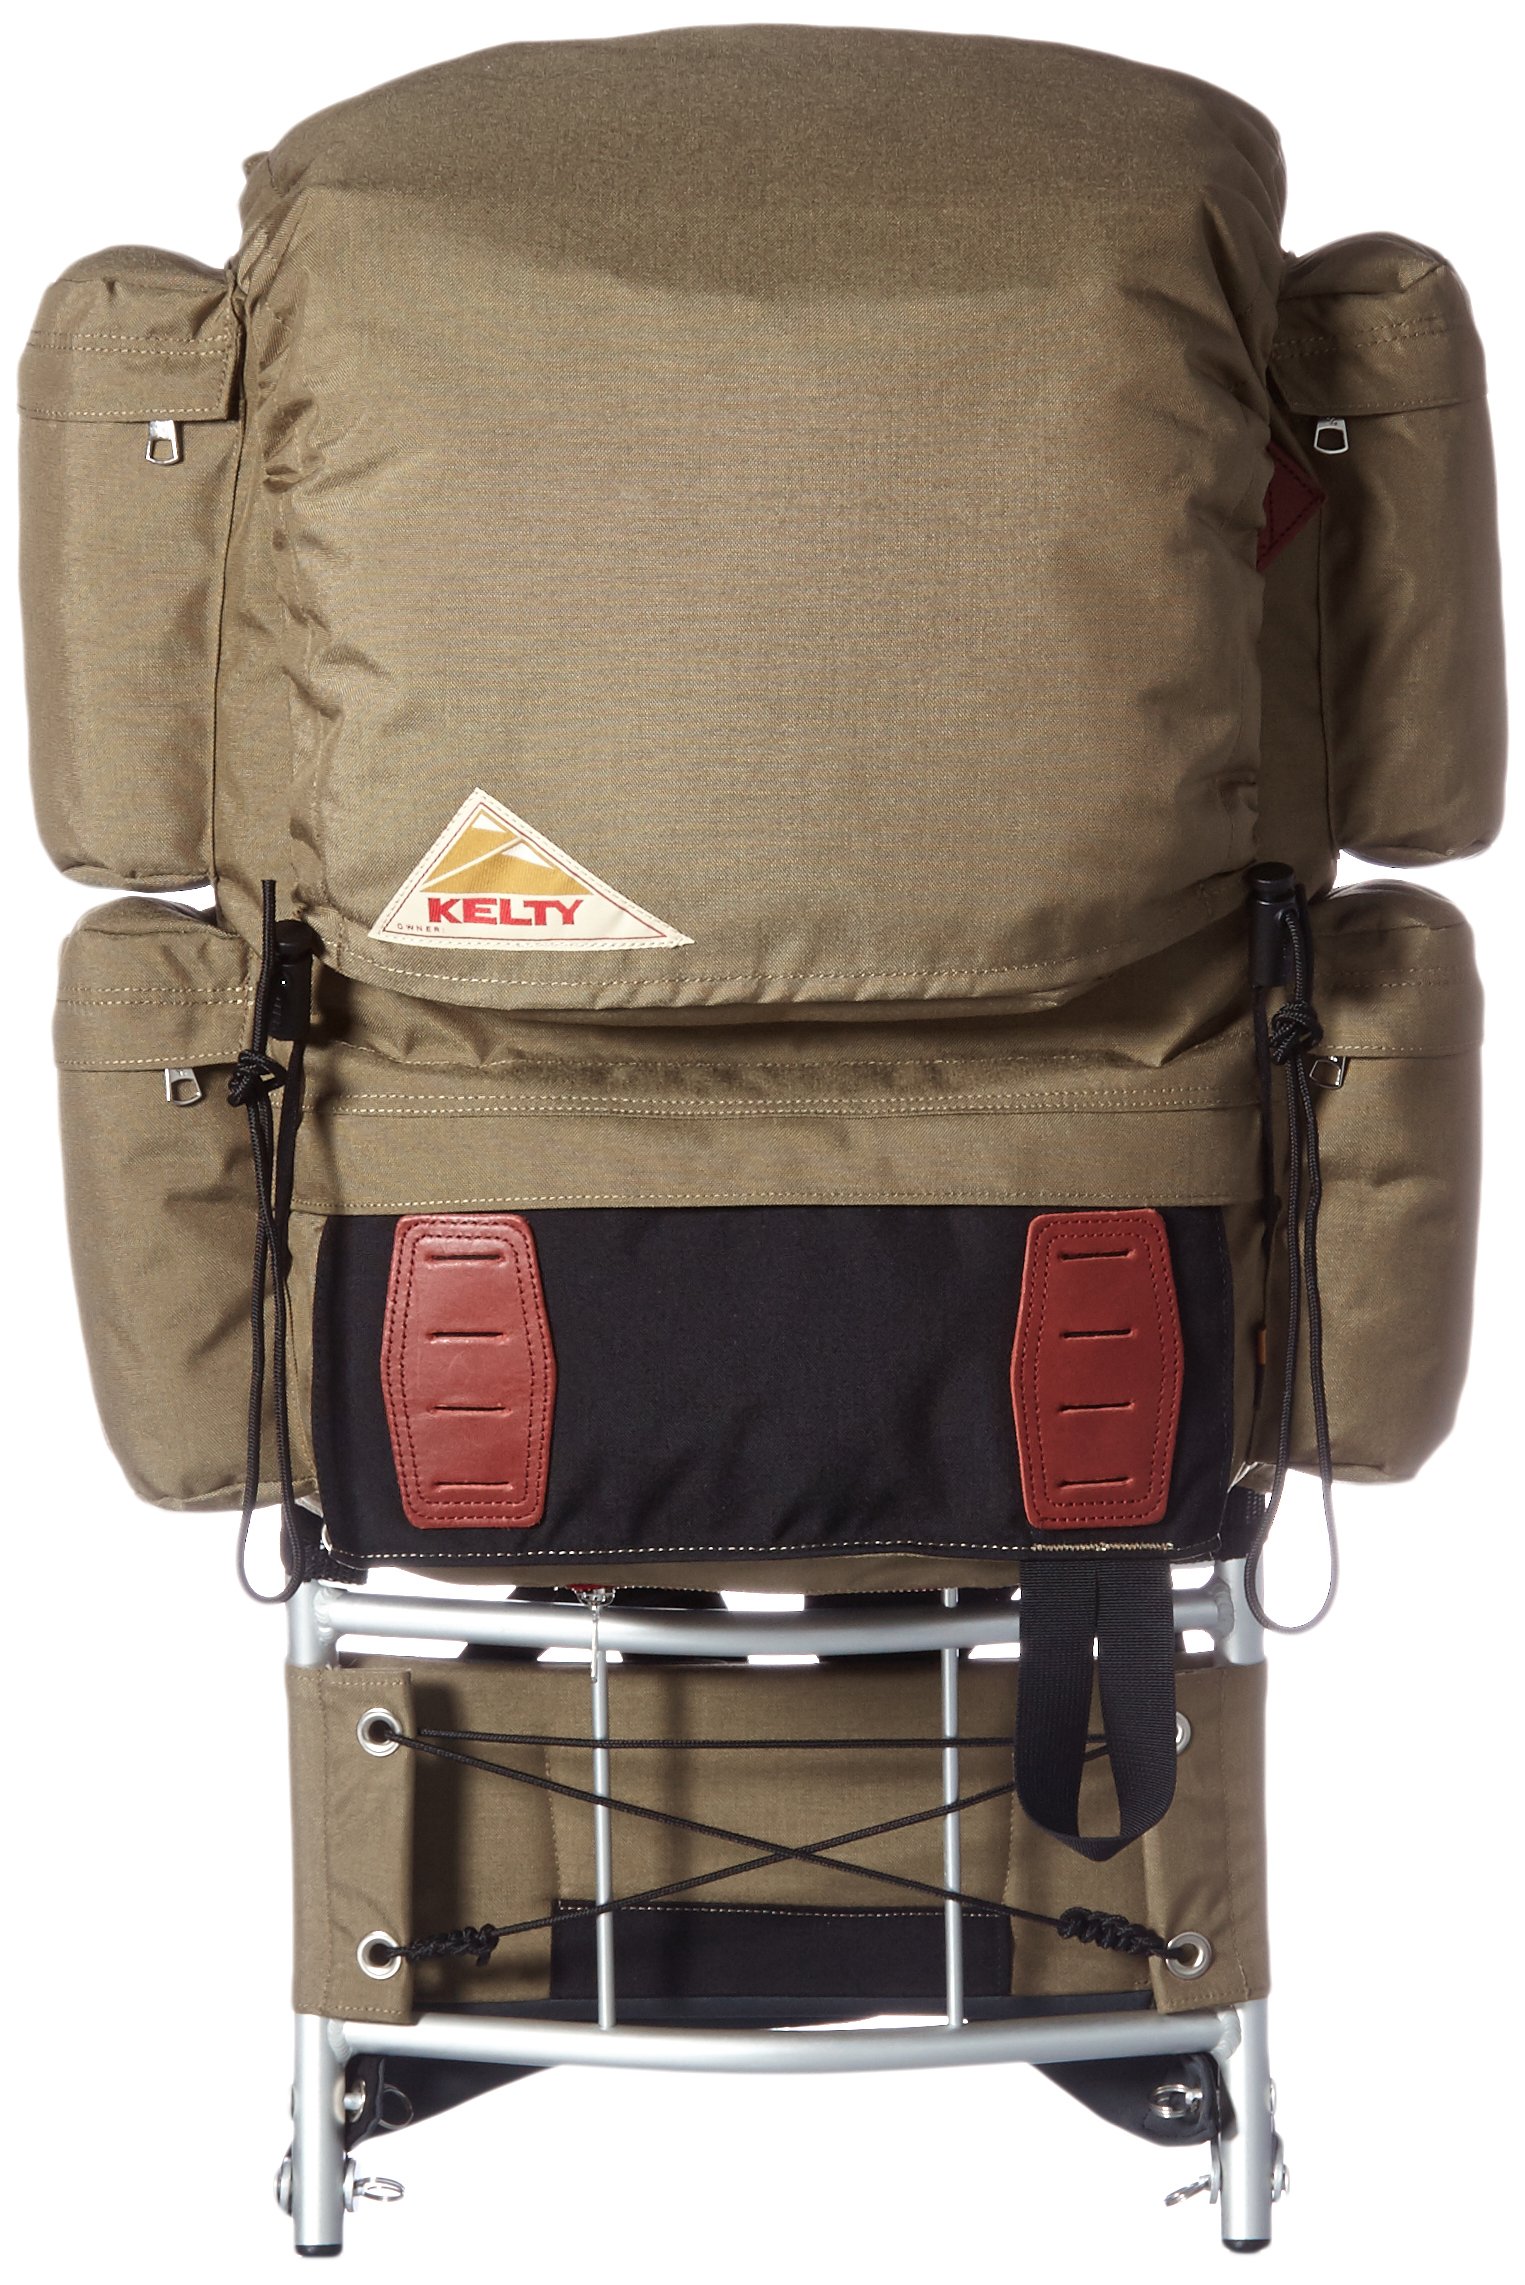 KELTY 2591852 Mountainer FRAME Pack 3 Backpack, Capacity: 9.8 gal (36 L), Tan